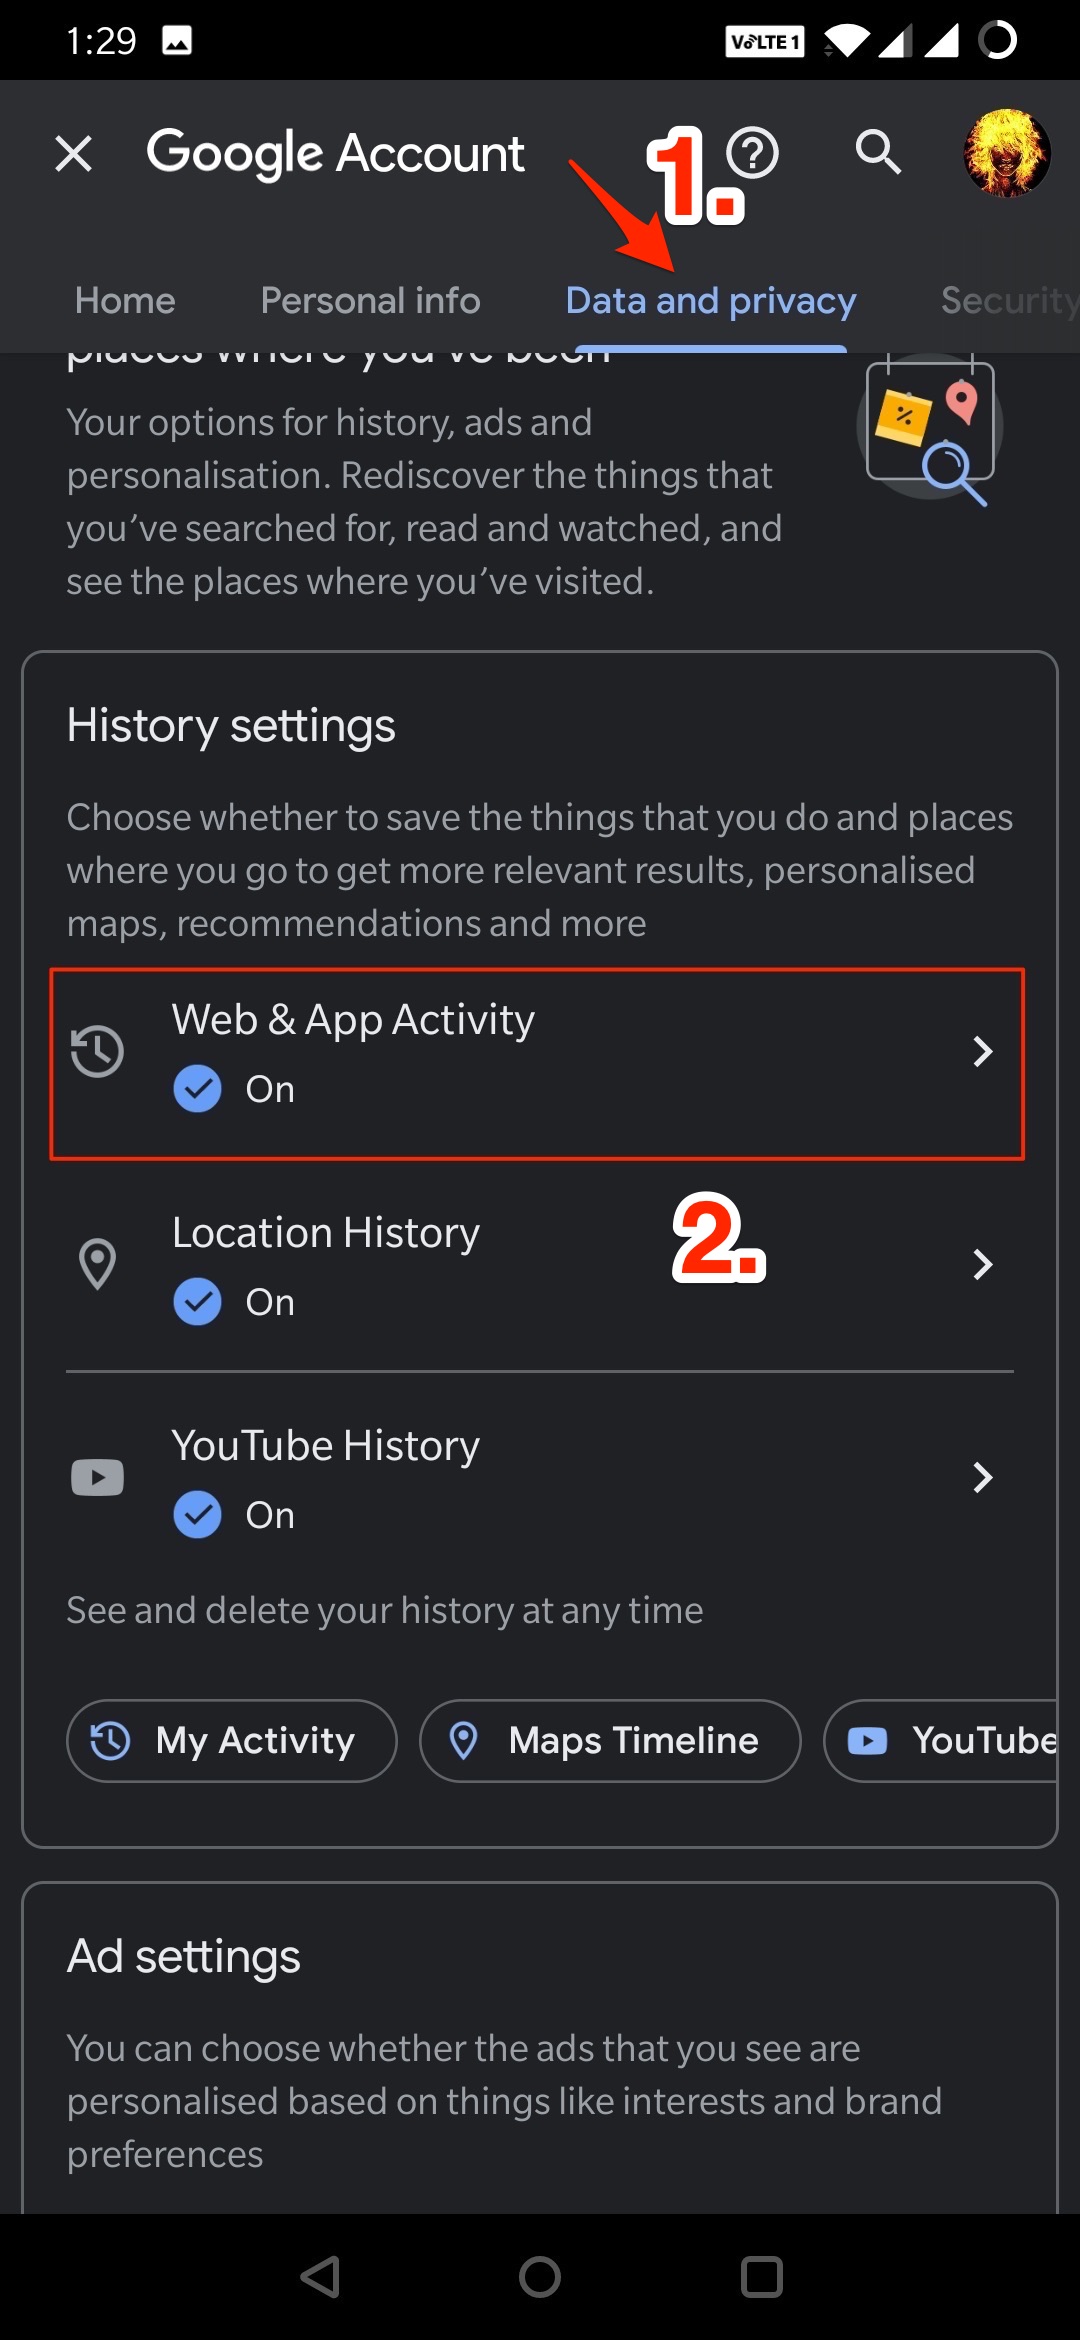 Under the History Settings option, click on Web & App Activity